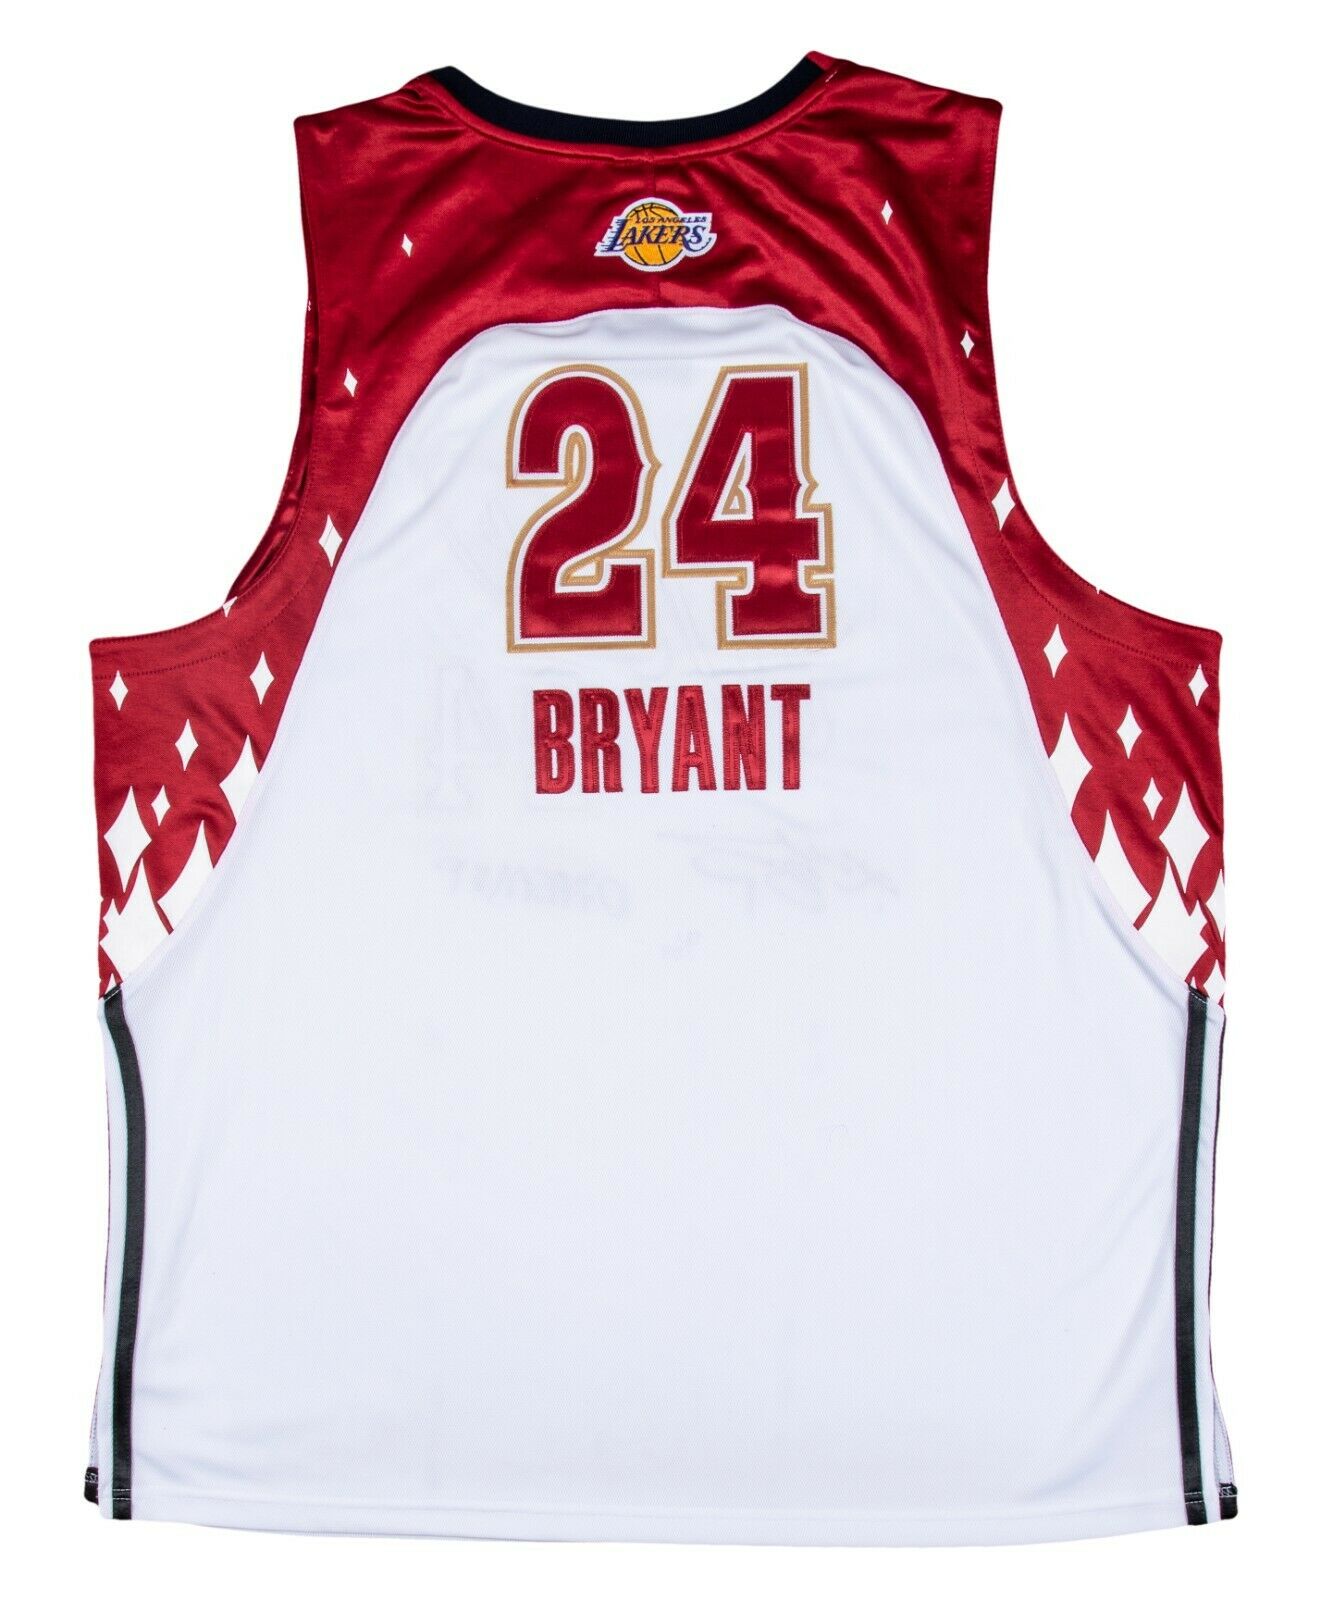 Kobe Bryant - Signed All Star jersey, vicdemo23